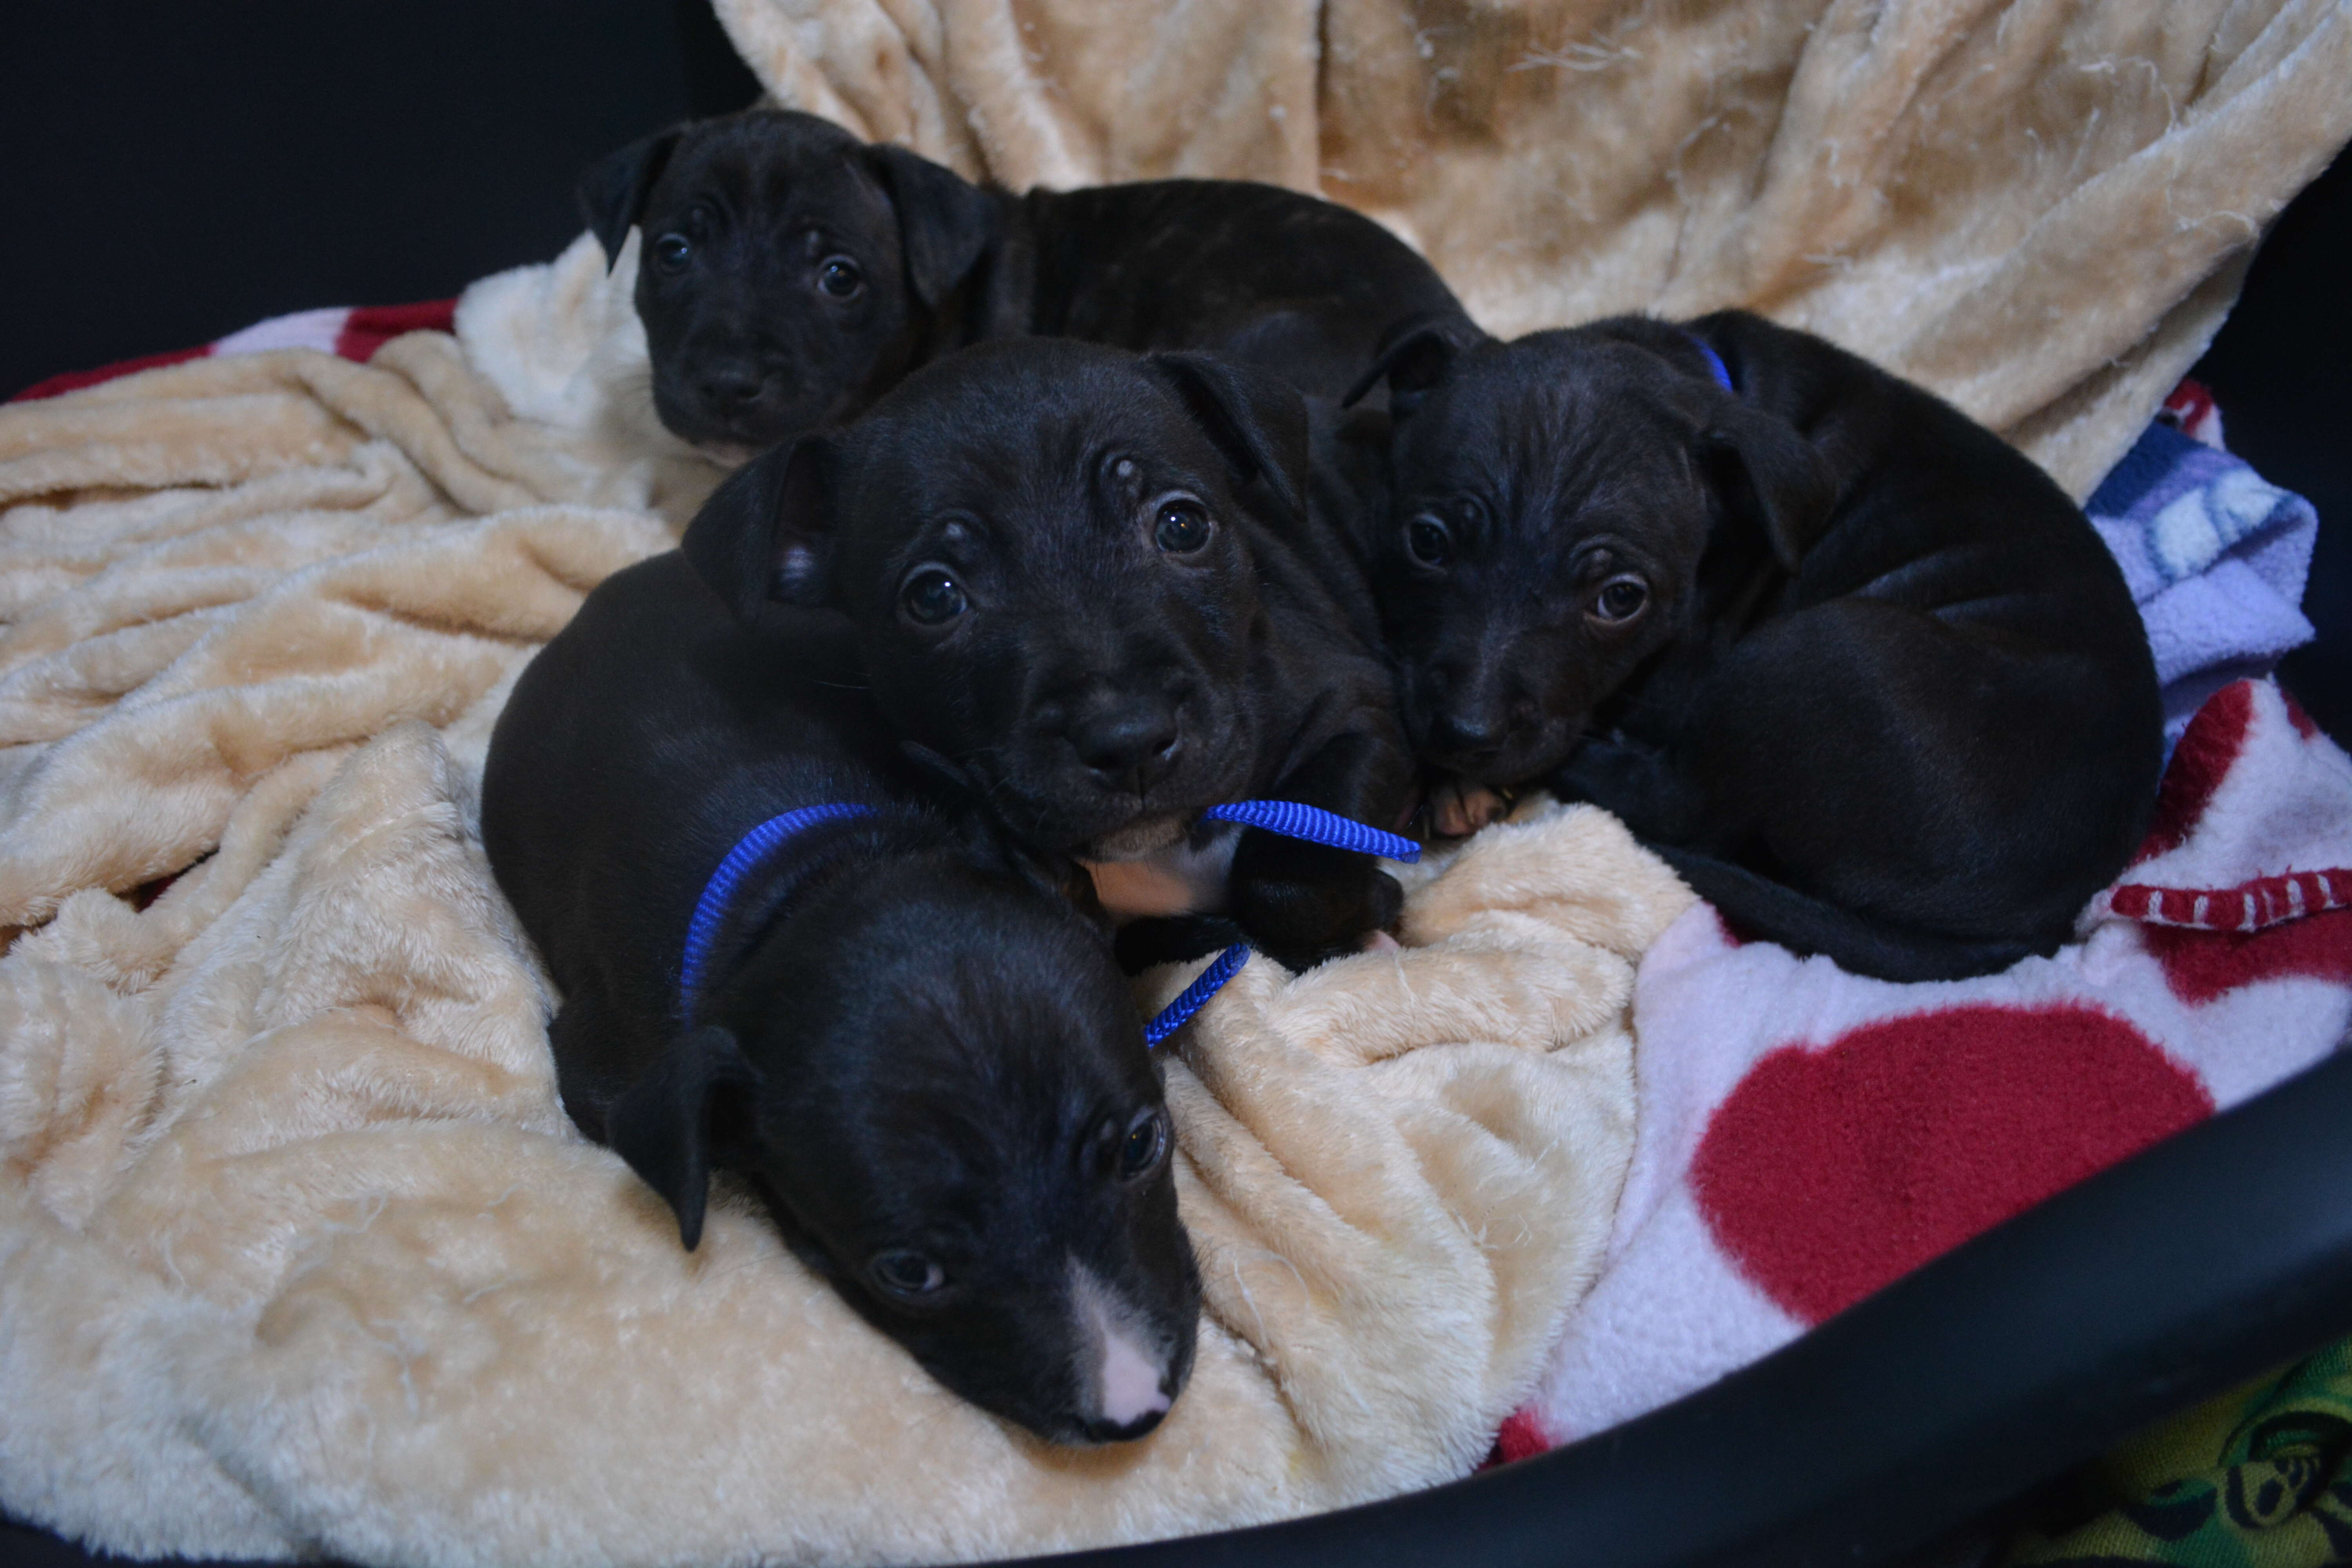 Rescued pit bull puppies napping in a pile at London shelter